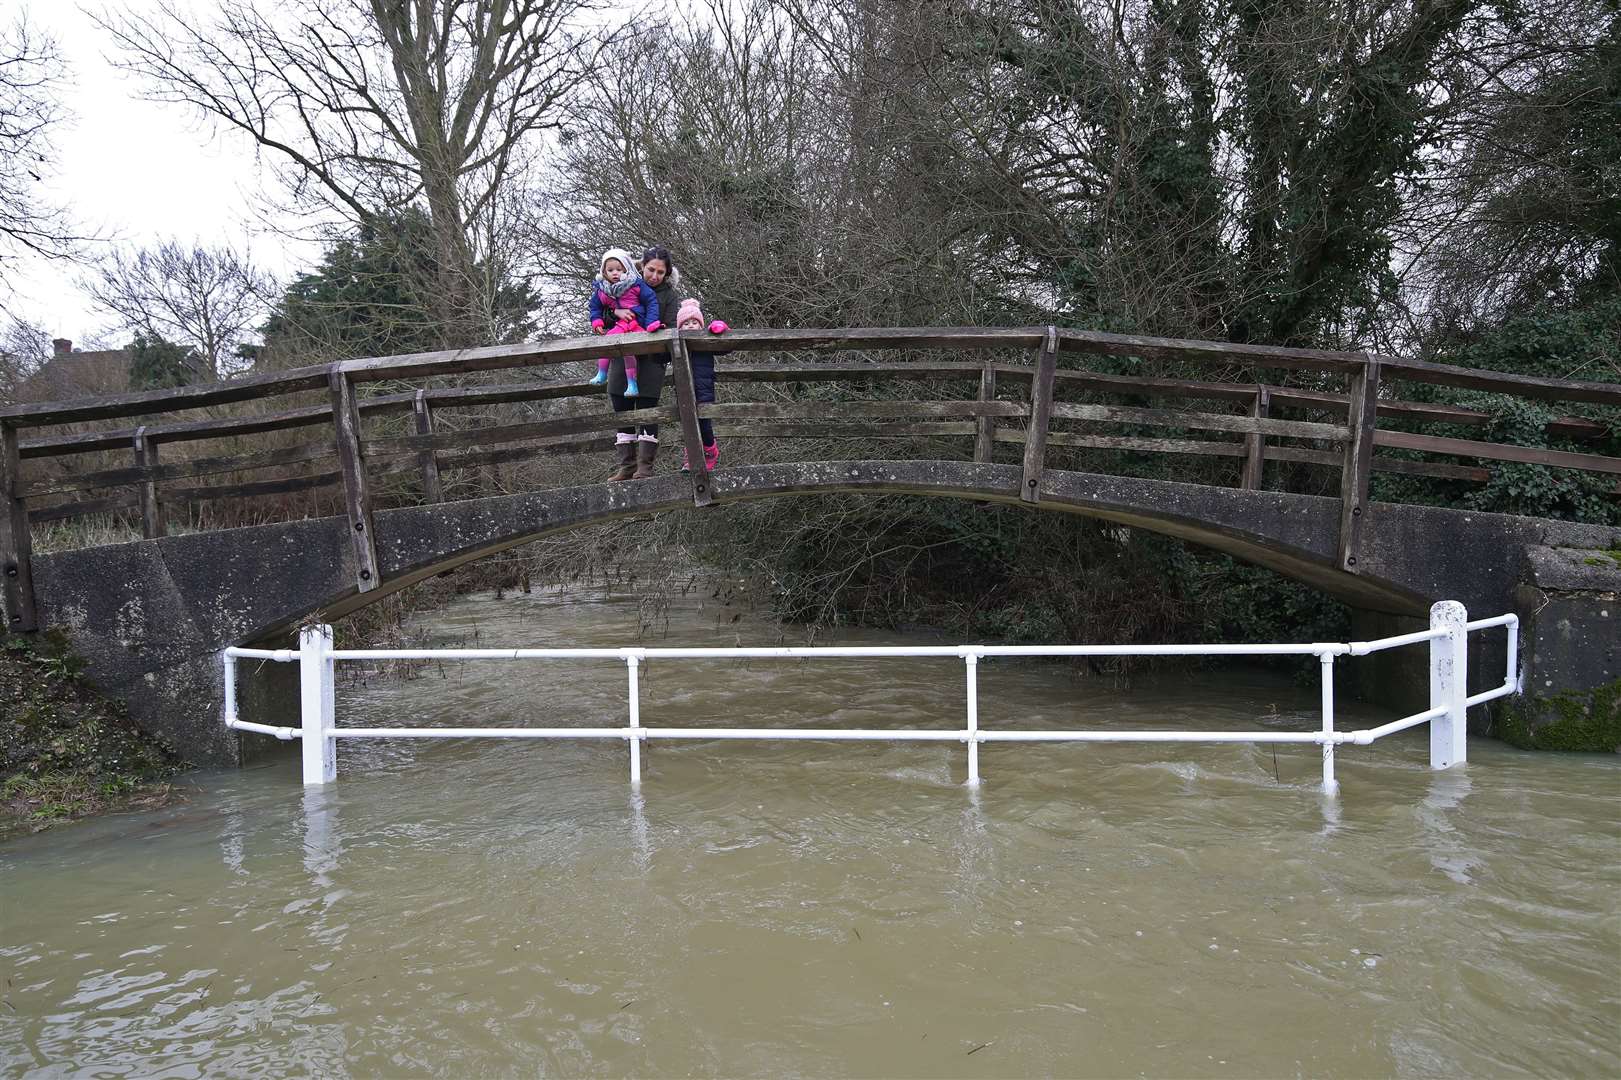 People cross a bridge over a swollen River Chelmer in the village of Great Easton, Dunmow, where it burst its banks (Yui Mok/PA)